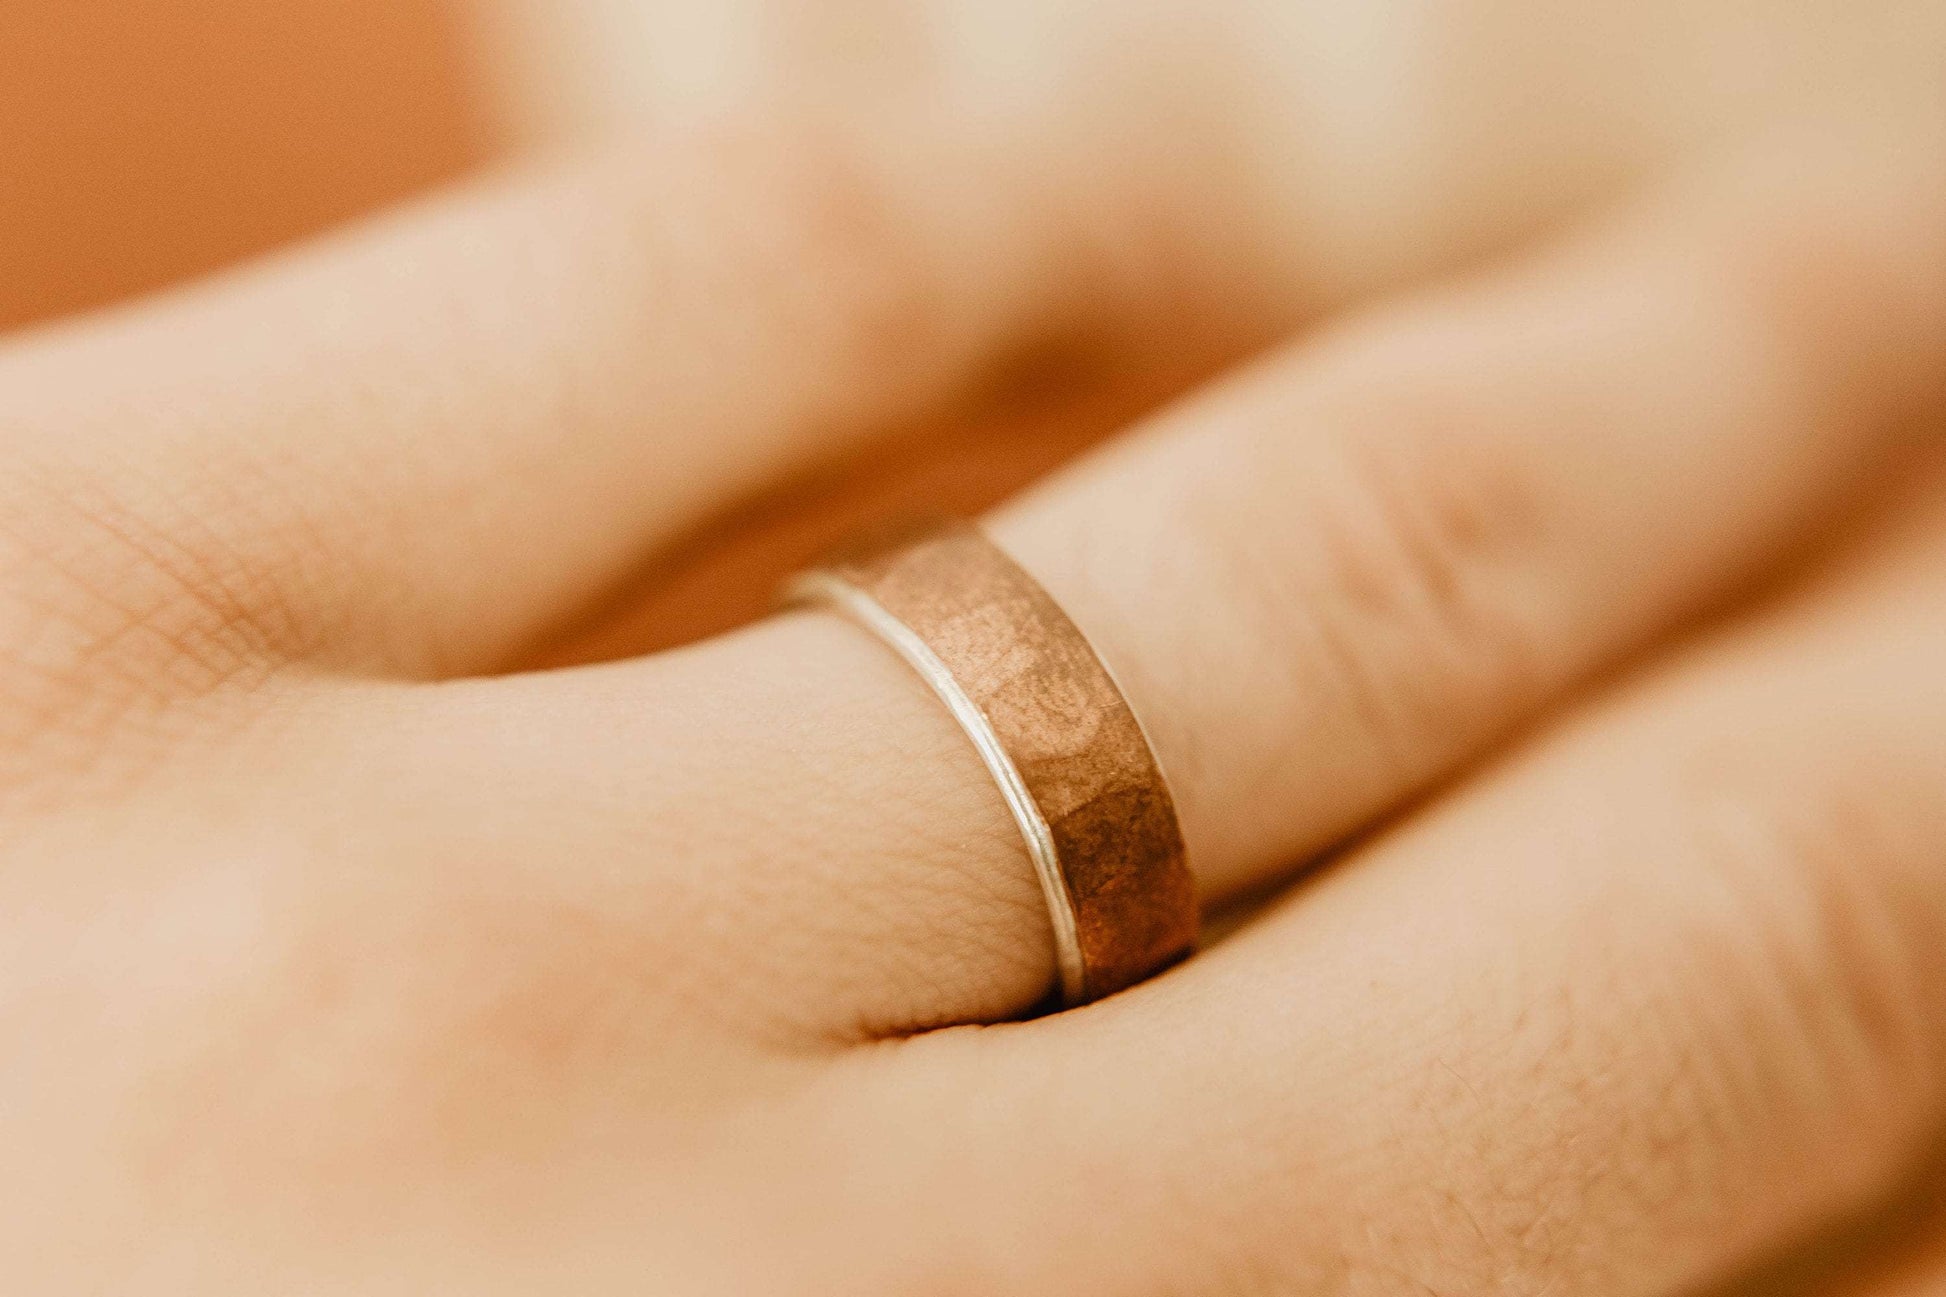 Rustic Mens Copper and Silver Wedding Band. This photo shows a ring with copper exterior and silver interior (Shown on finger)